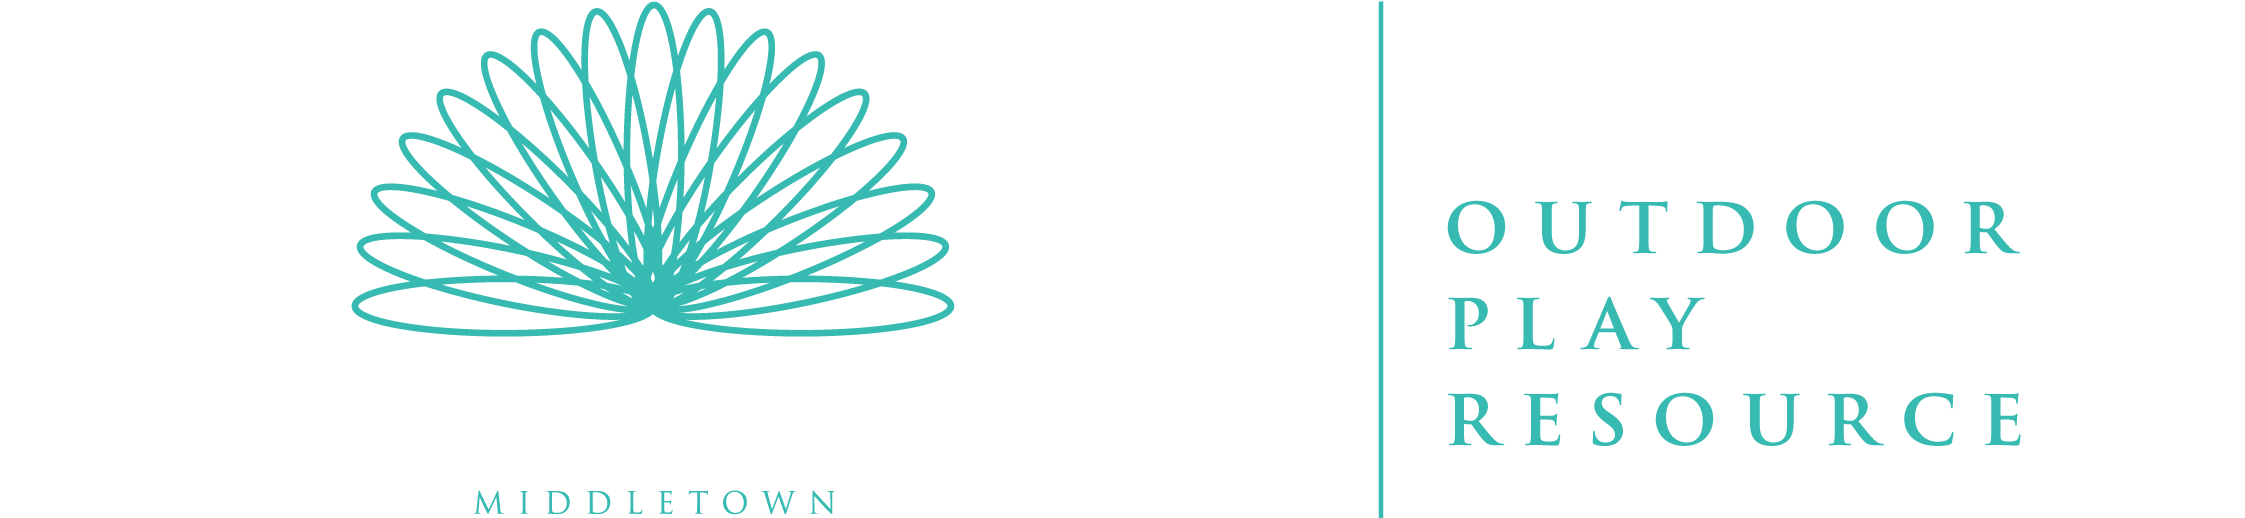 Middletown Centre for Autism Capacity Resource logo